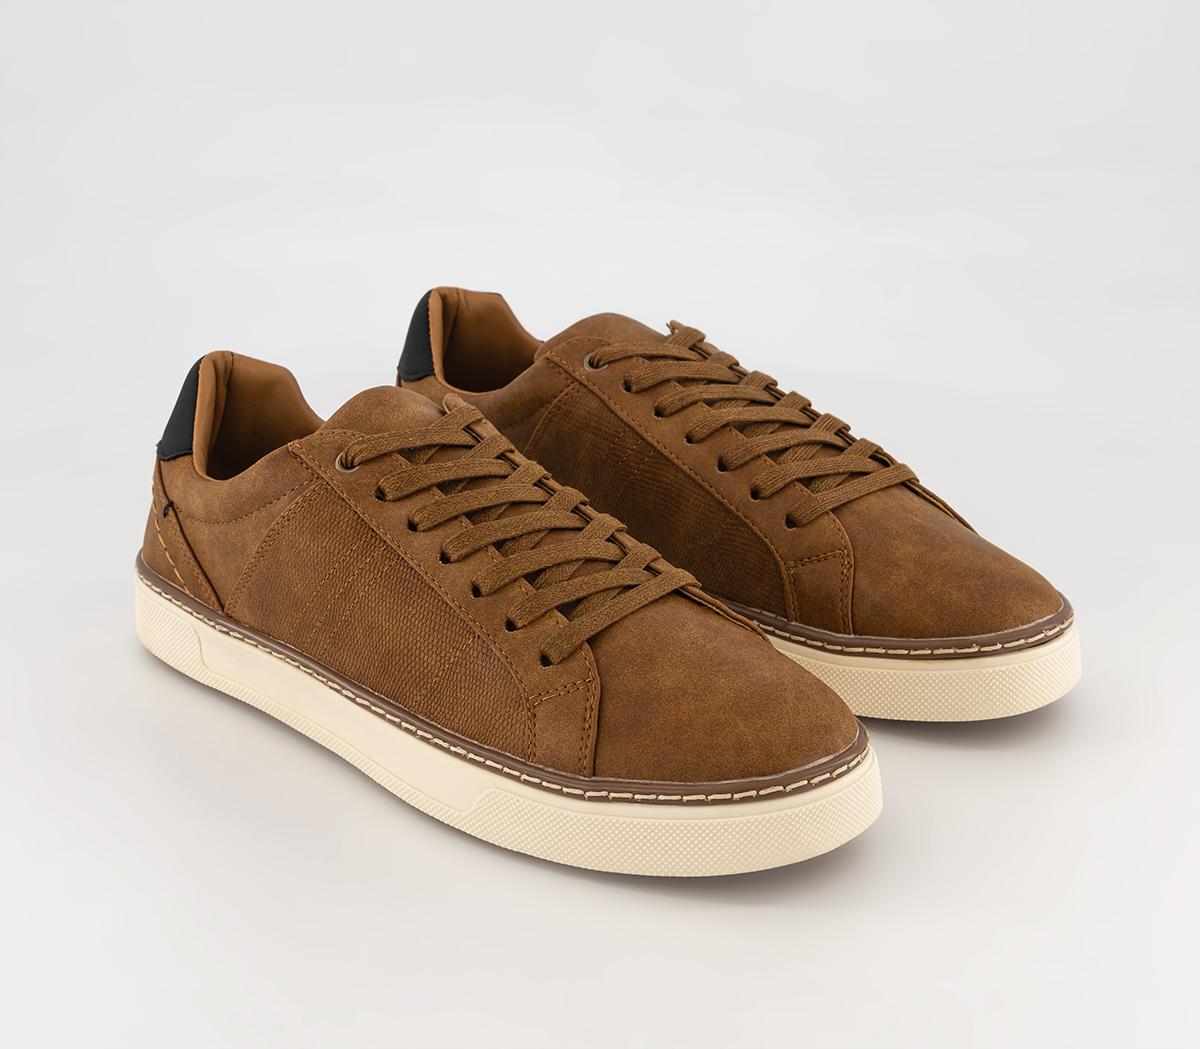 OFFICE Mens Calvert Rand Lace To Toe Sneakers Tan Brown, 7